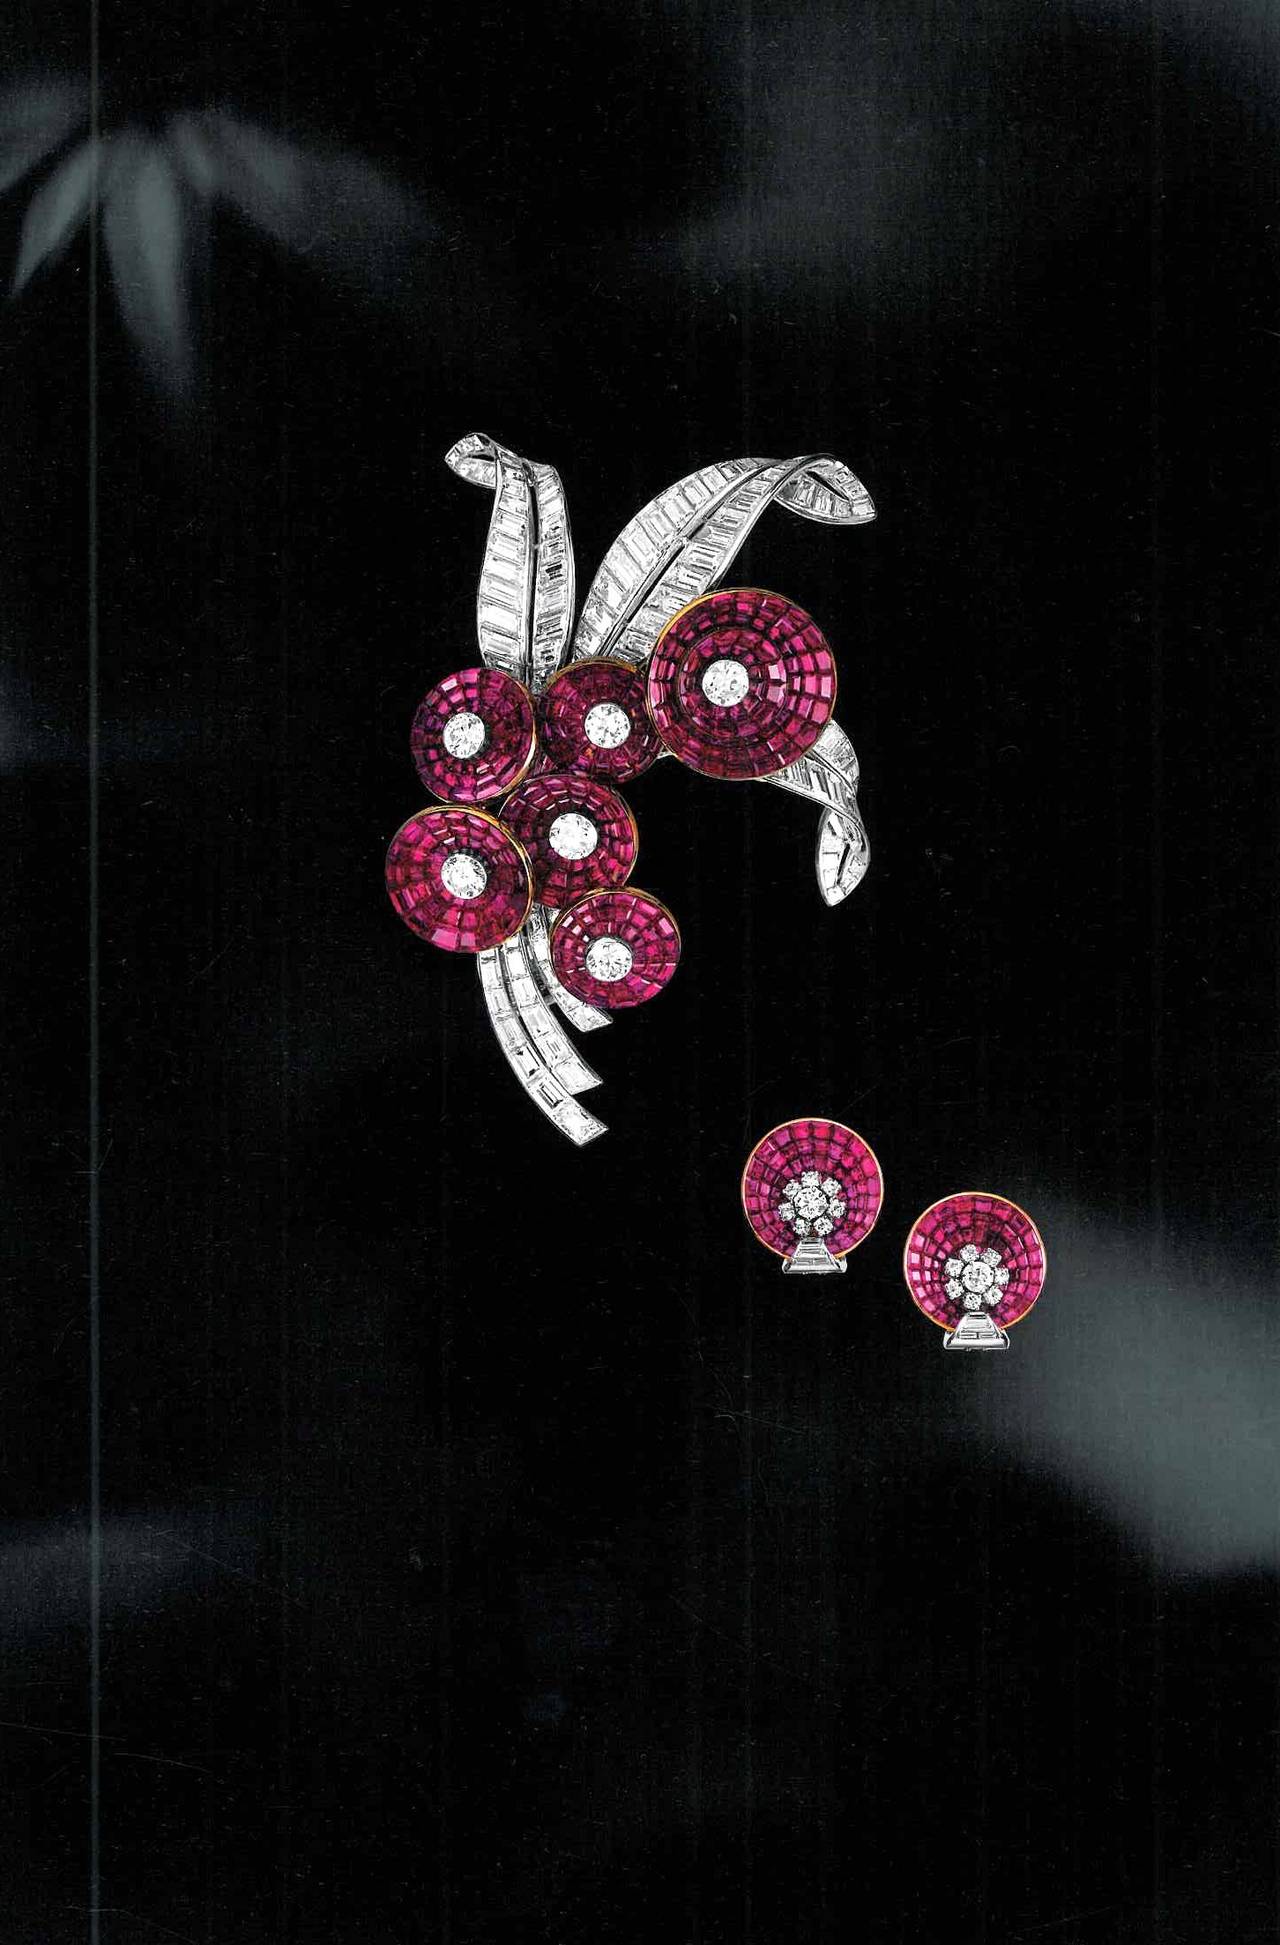 This is a most wonderful catalogue, which was published in hard back in 2009 in conjunction with a Japanese retrospective exhibition at The Mori Arts Center Gallery of the work of Van Cleef & Arpels. It is one of the most lavish catalogues ever seen